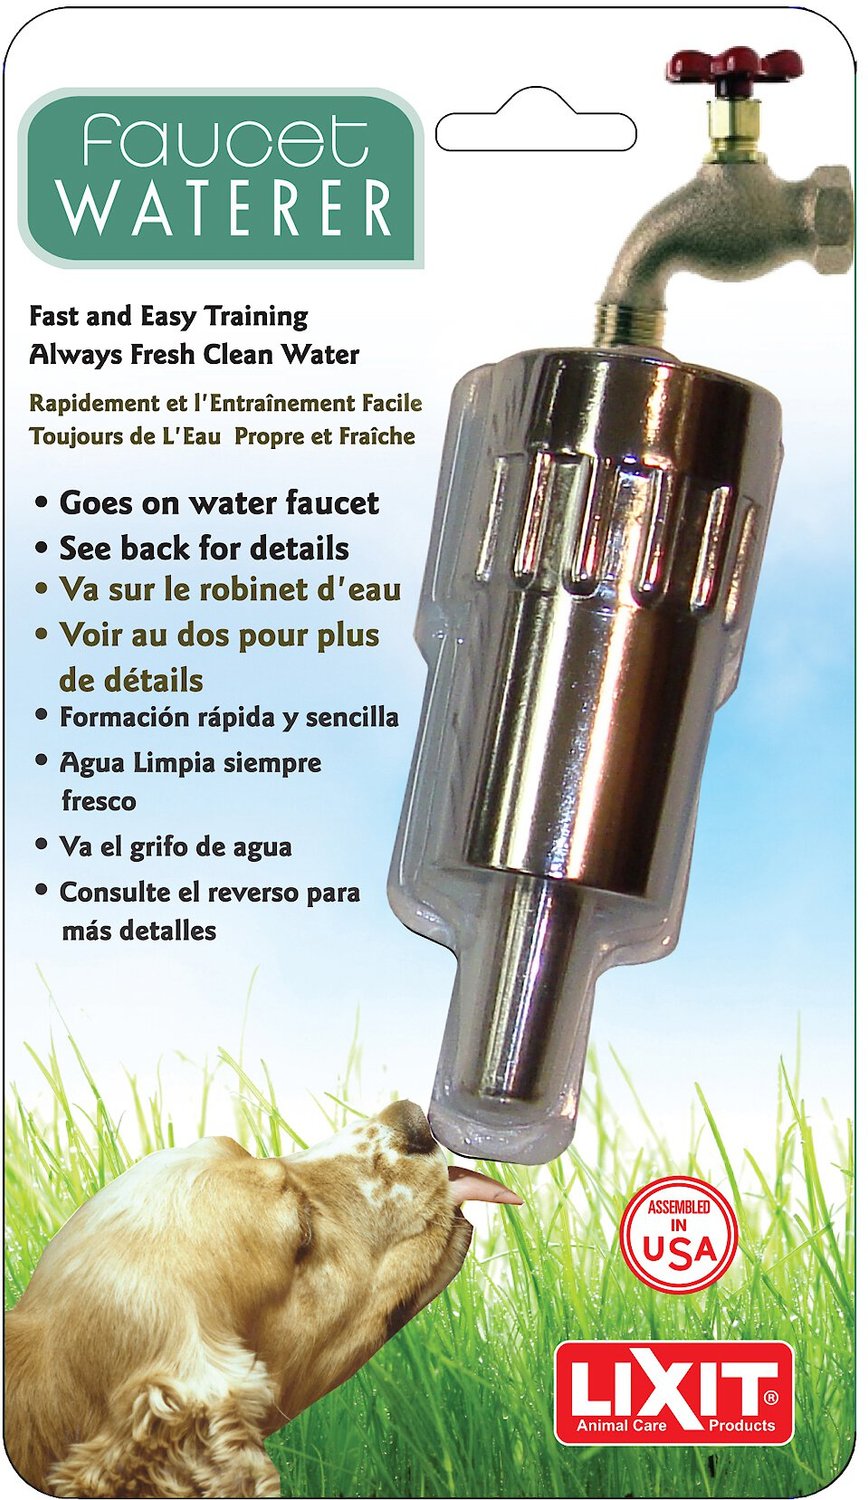 LIXIT Dog Faucet Waterer - Chewy.com